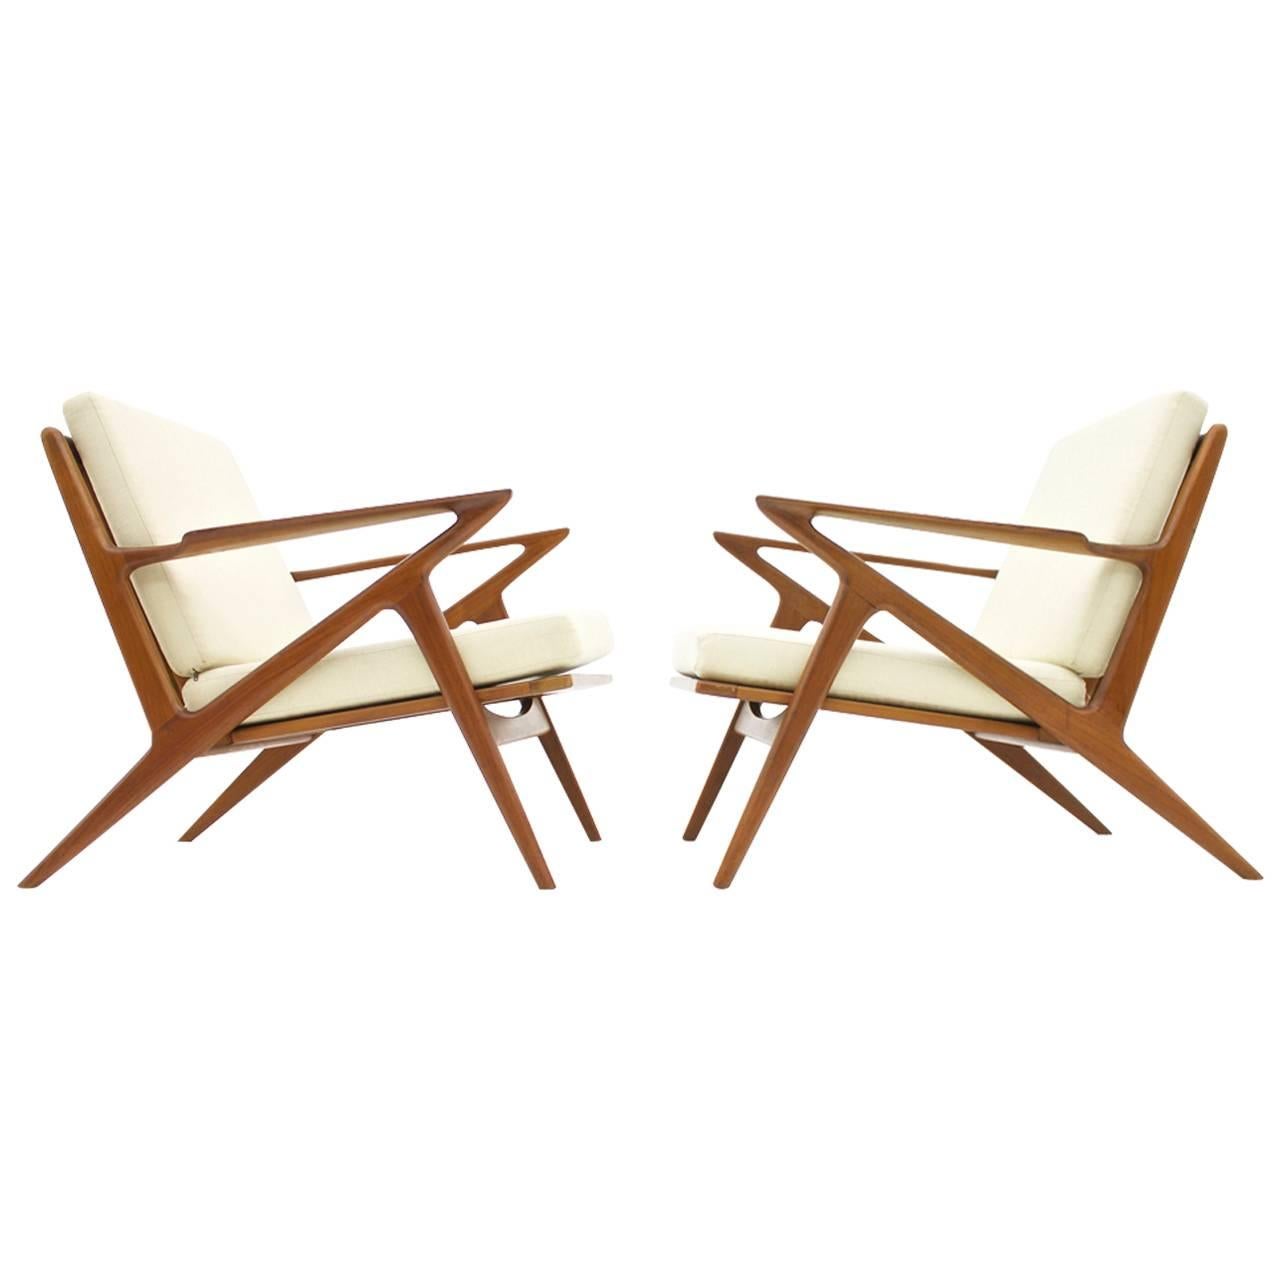 Pair of Danish Teak Wood "Z" Lounge Chairs by Poul Jensen for Selig, 1960s